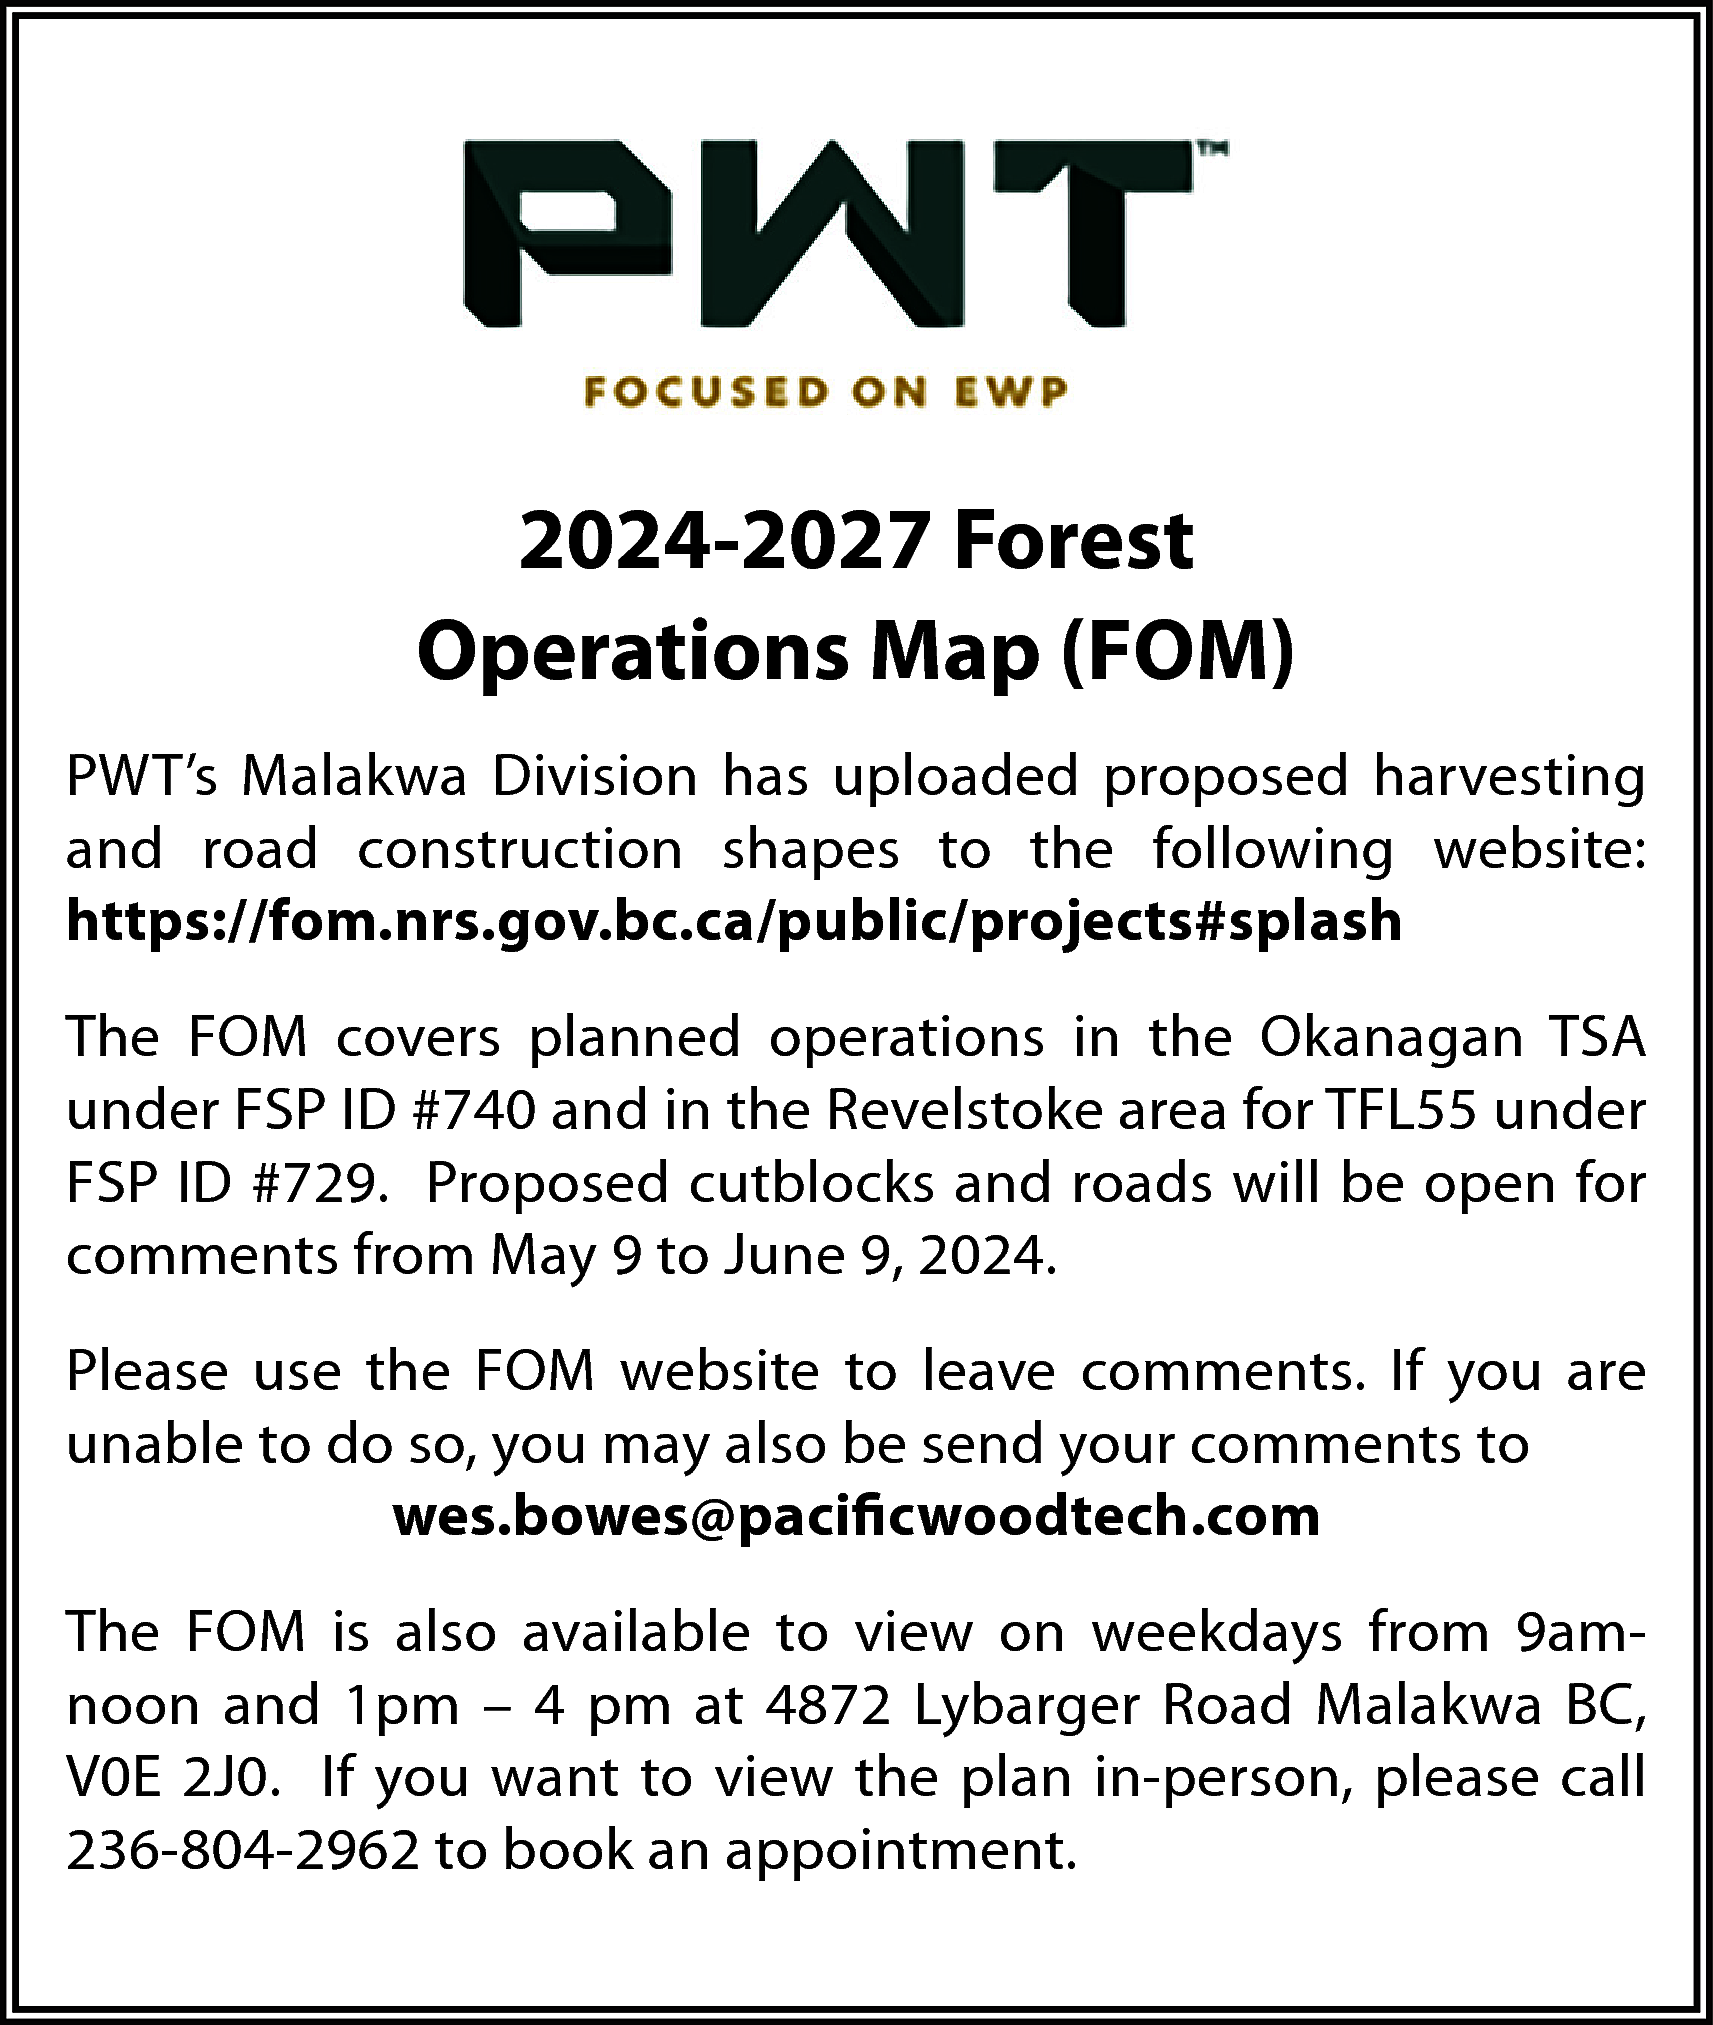 2024-2027 Forest <br>Operations Map (FOM)  2024-2027 Forest  Operations Map (FOM)  PWT’s Malakwa Division has uploaded proposed harvesting  and road construction shapes to the following website:  https://fom.nrs.gov.bc.ca/public/projects#splash  The FOM covers planned operations in the Okanagan TSA  under FSP ID #740 and in the Revelstoke area for TFL55 under  FSP ID #729. Proposed cutblocks and roads will be open for  comments from May 9 to June 9, 2024.  Please use the FOM website to leave comments. If you are  unable to do so, you may also be send your comments to  wes.bowes@pacificwoodtech.com  The FOM is also available to view on weekdays from 9amnoon and 1pm – 4 pm at 4872 Lybarger Road Malakwa BC,  V0E 2J0. If you want to view the plan in-person, please call  236-804-2962 to book an appointment.    